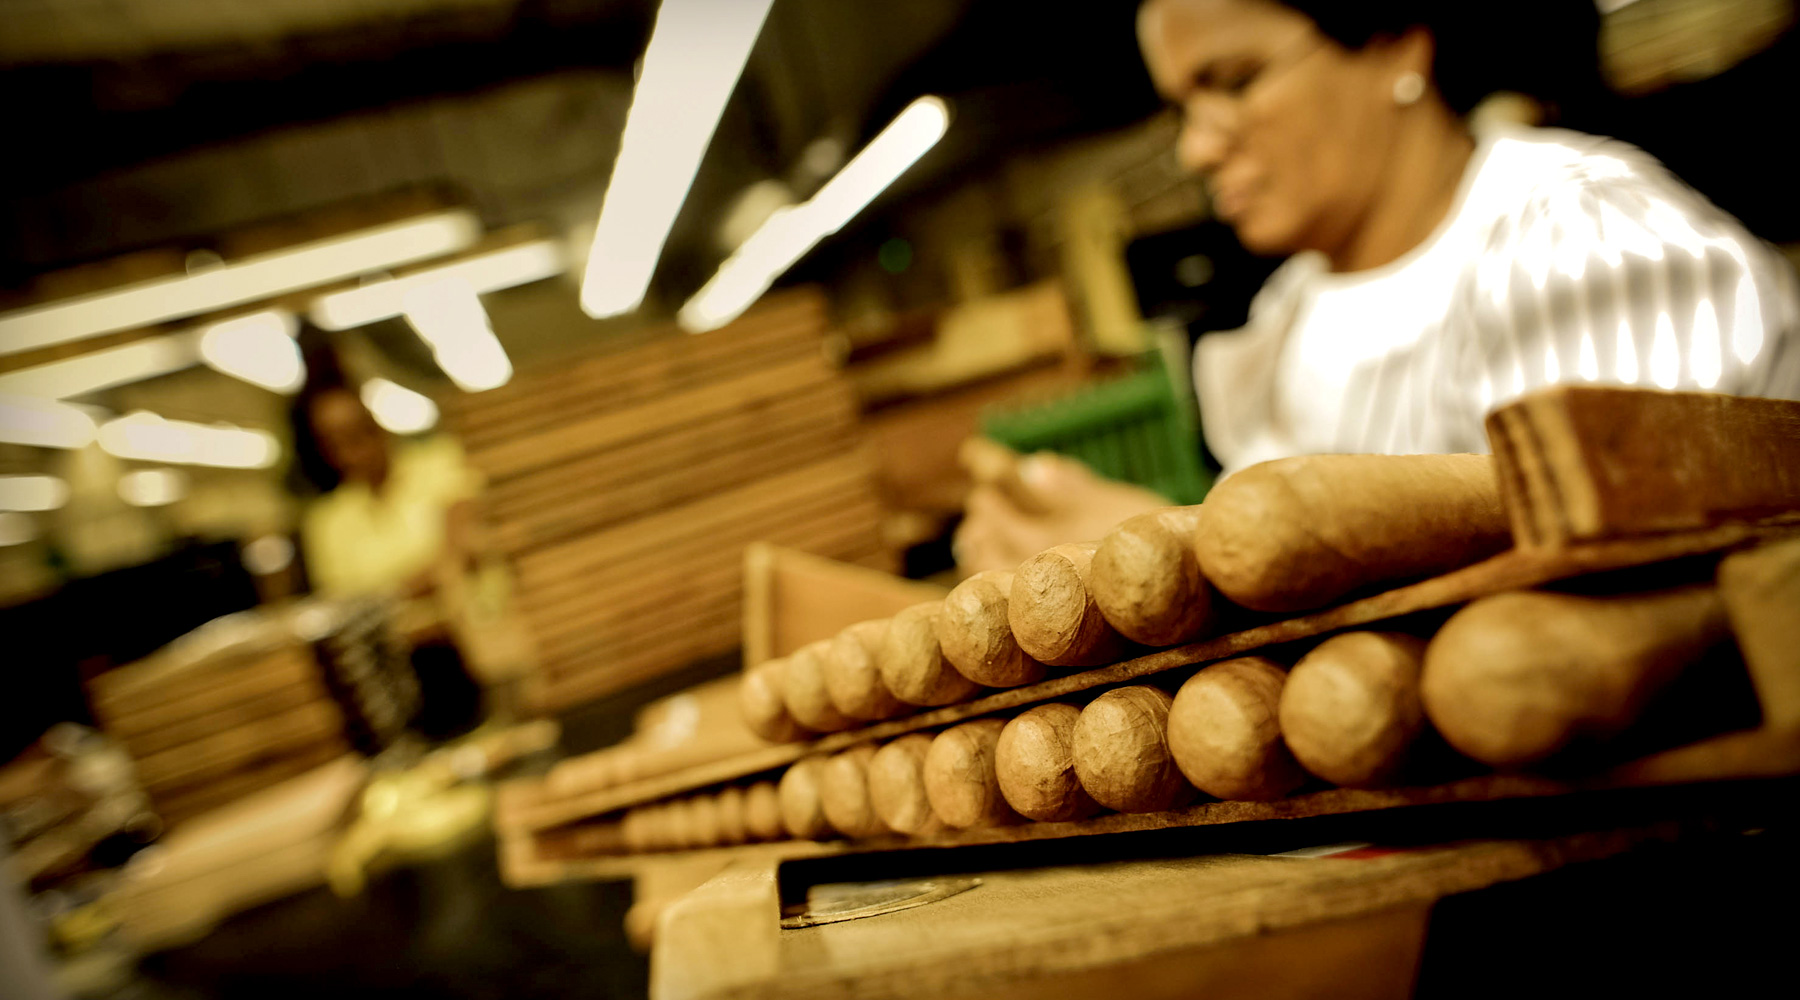 Experience the art of cigar making first hand by master craftsmen.